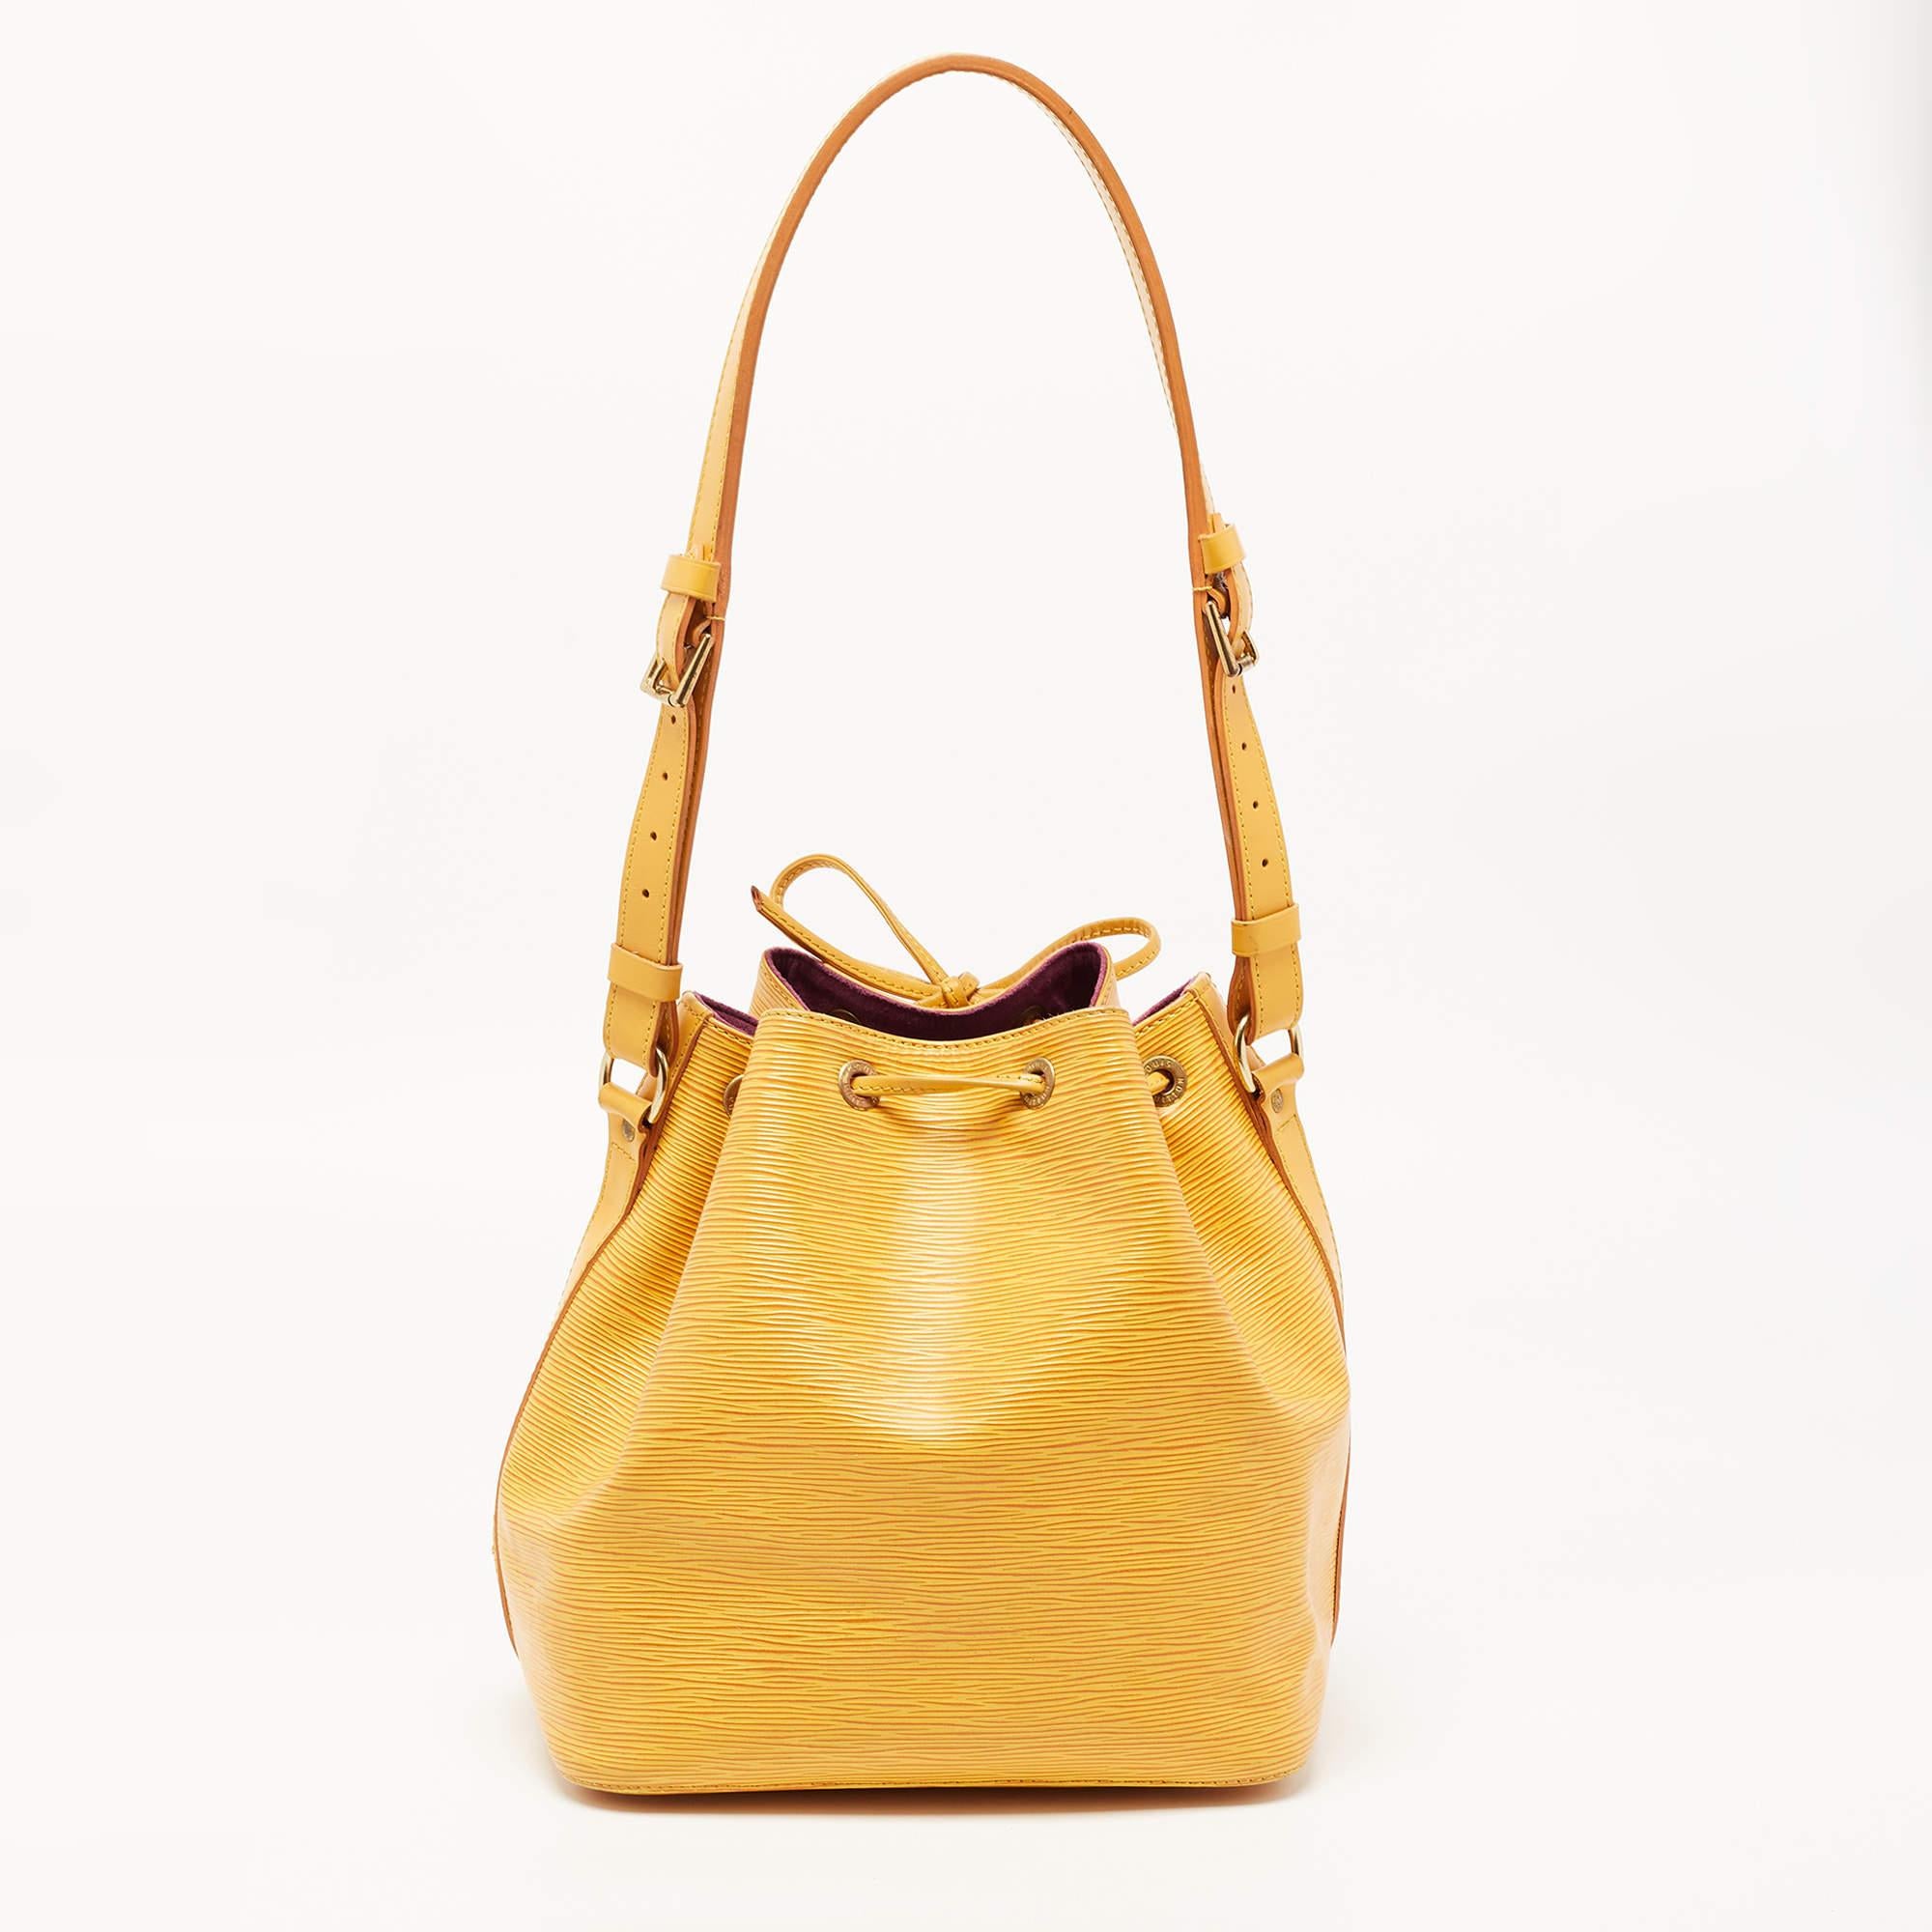 Vachetta Cowhide Leather Handle Strap For Noe BB Epi Bucket Bags Golden  Clasps